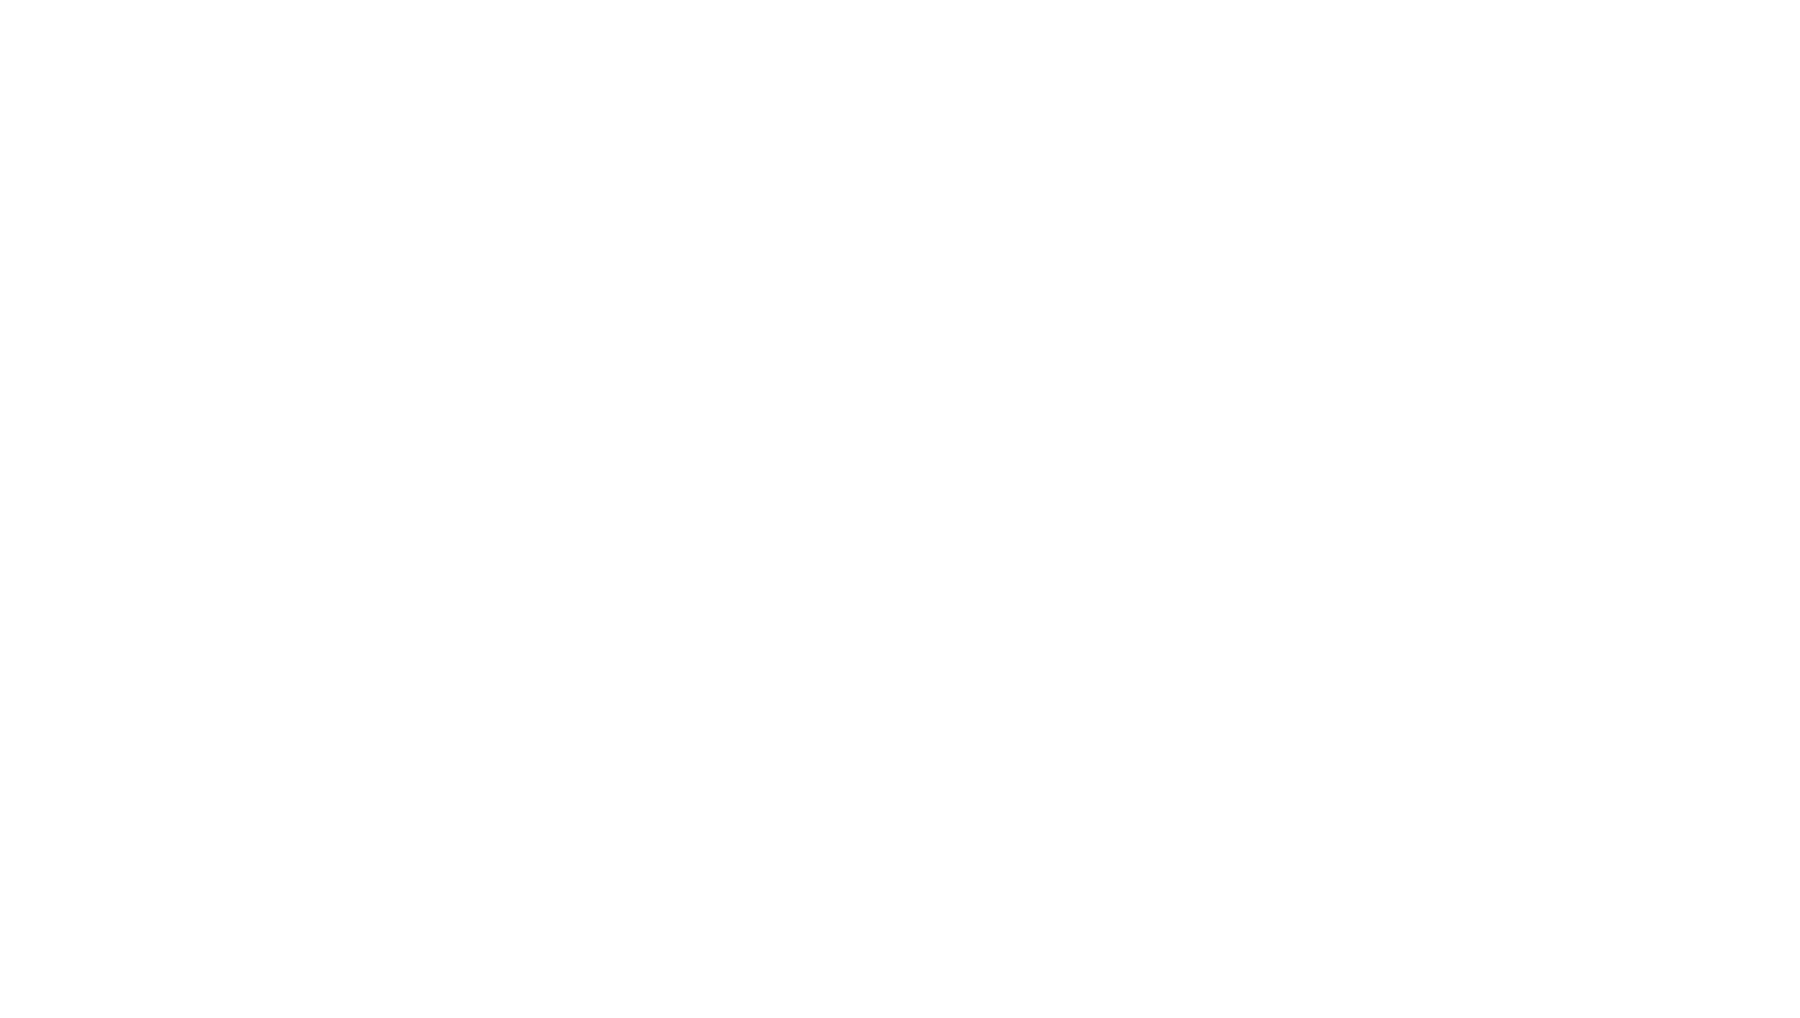 Cities: Skylines II will hit PS5 and Xbox Series X/S in spring 2024